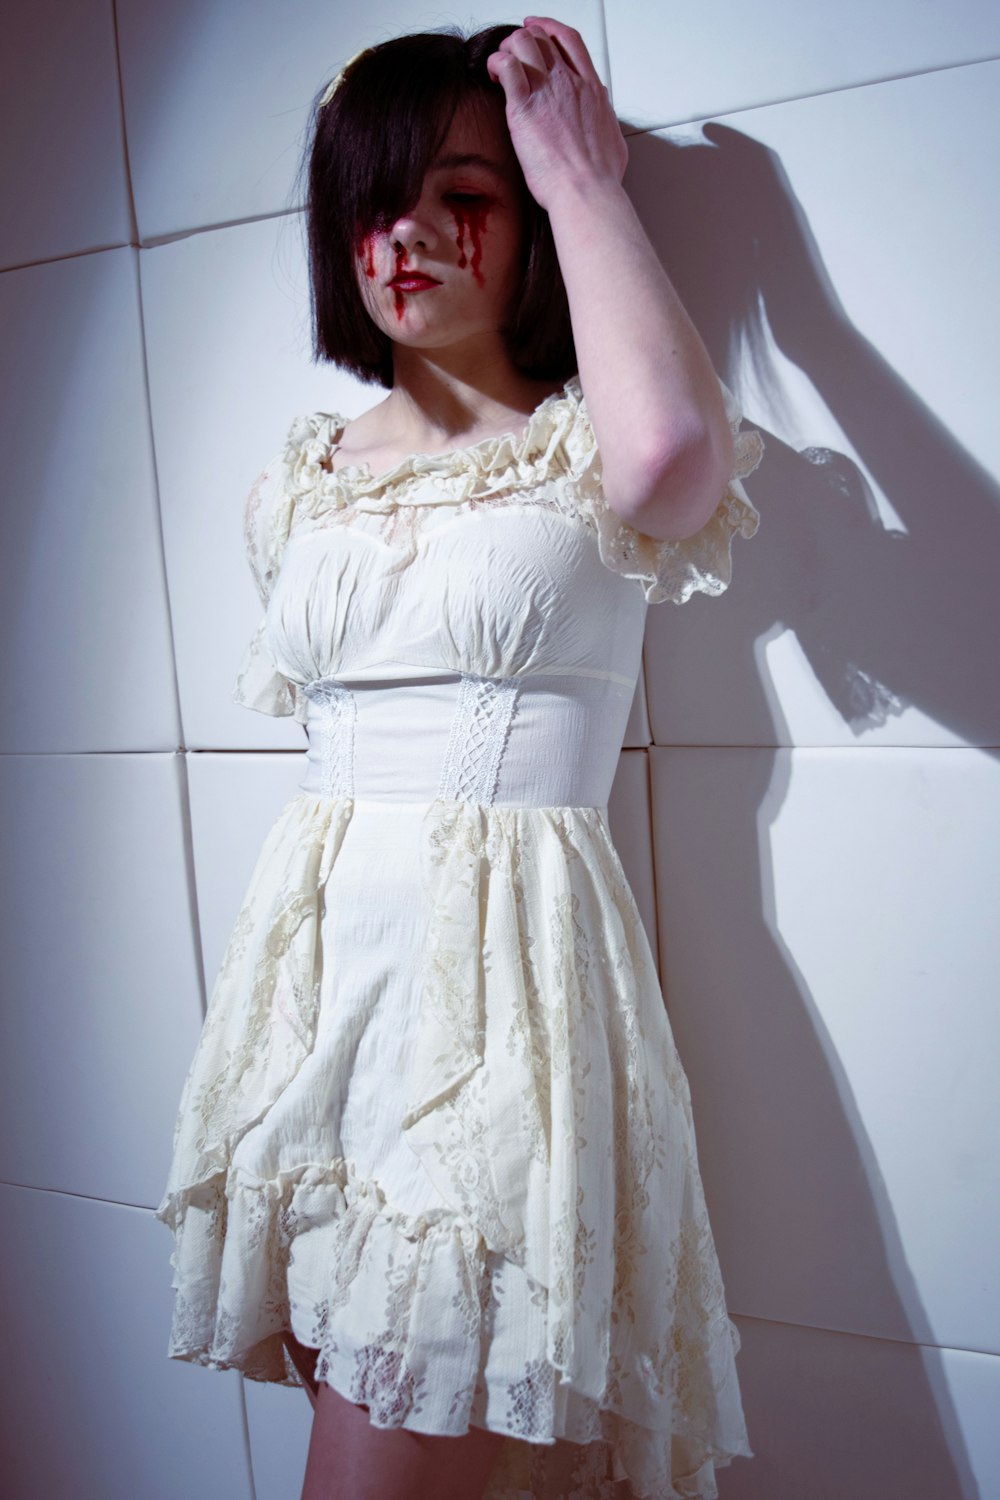 a woman in a white dress with blood on her face